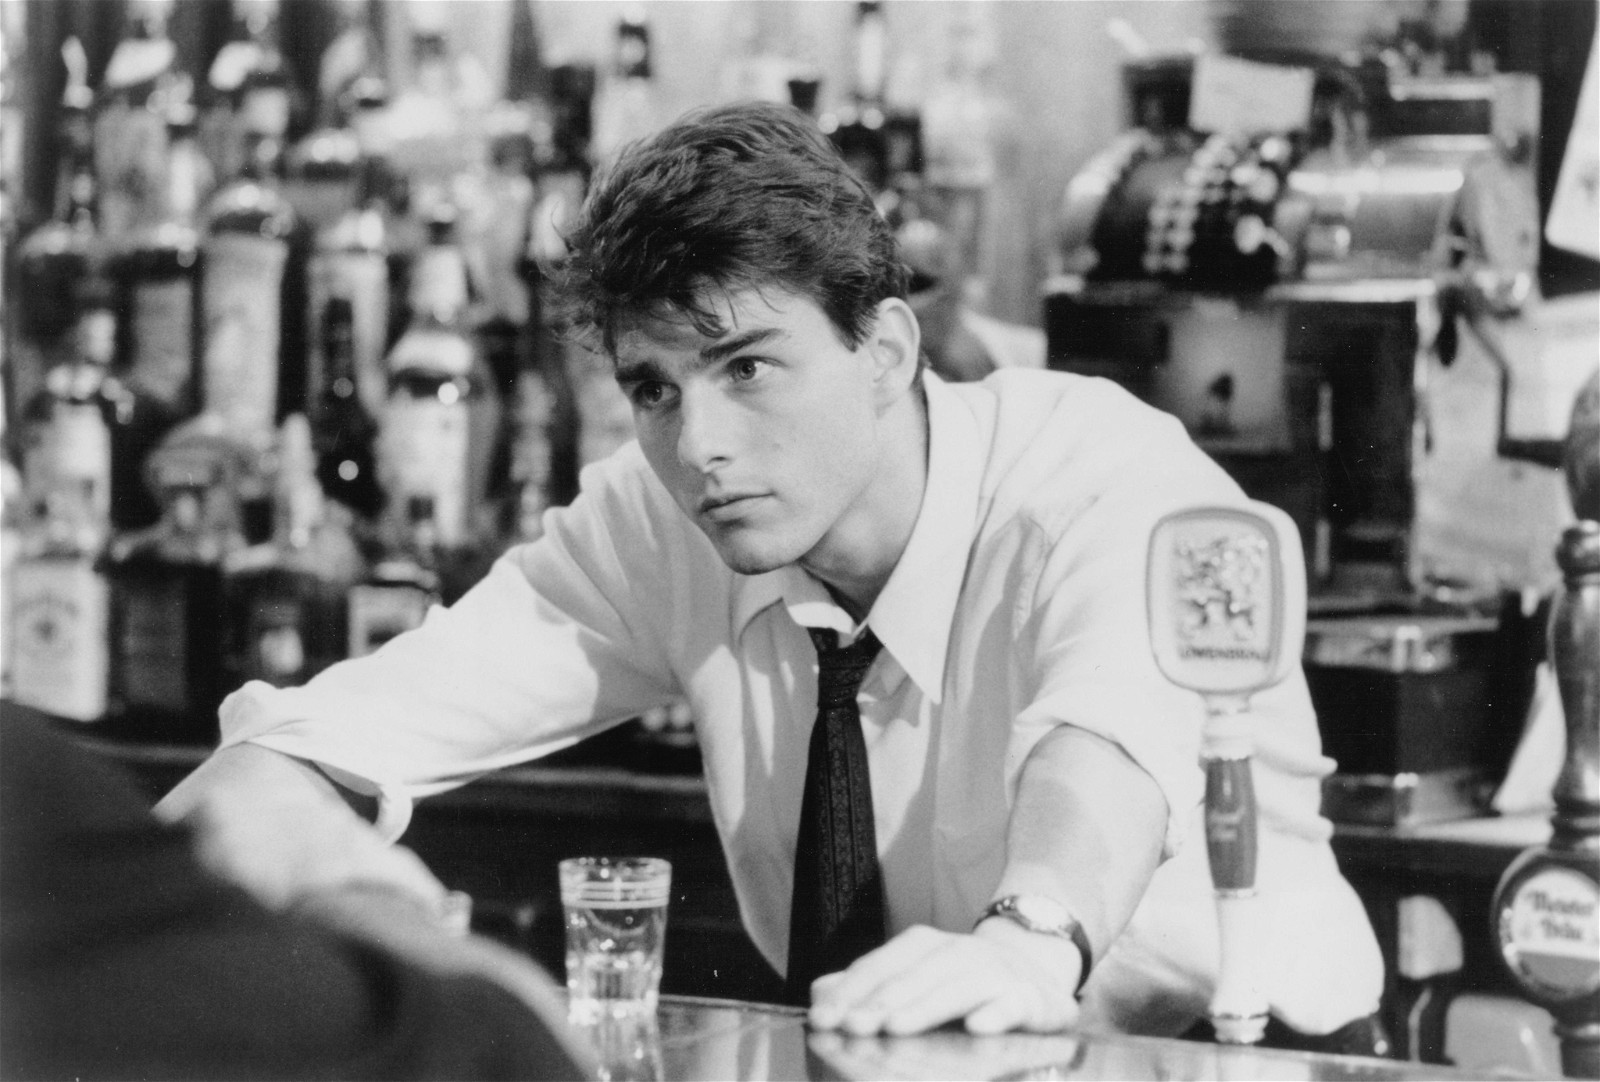 Tom Cruise in a still from Cocktail (1988).